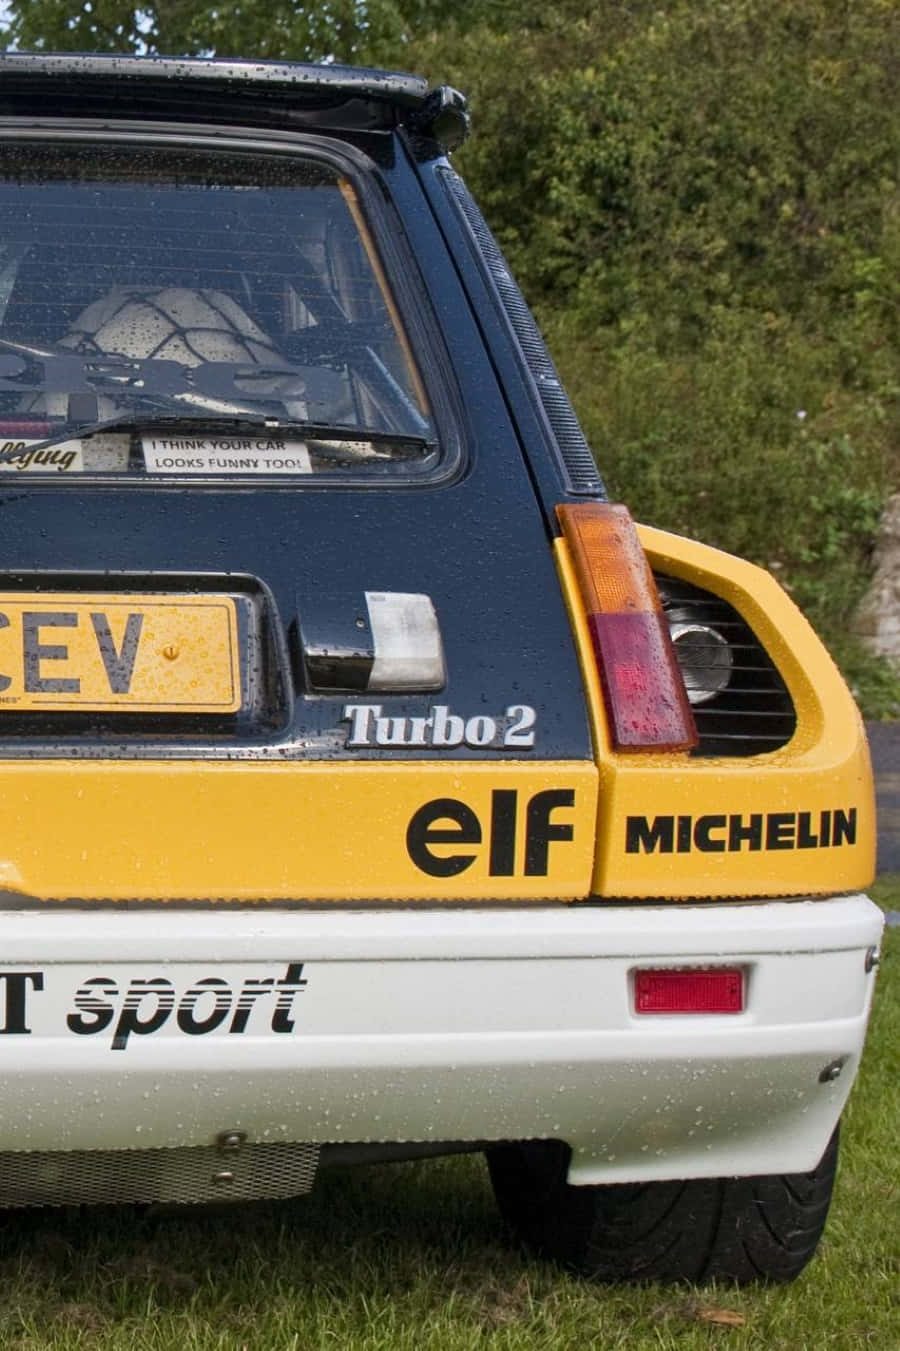 Vintage Renault 5 Turbo Parked at a Racing Event Wallpaper